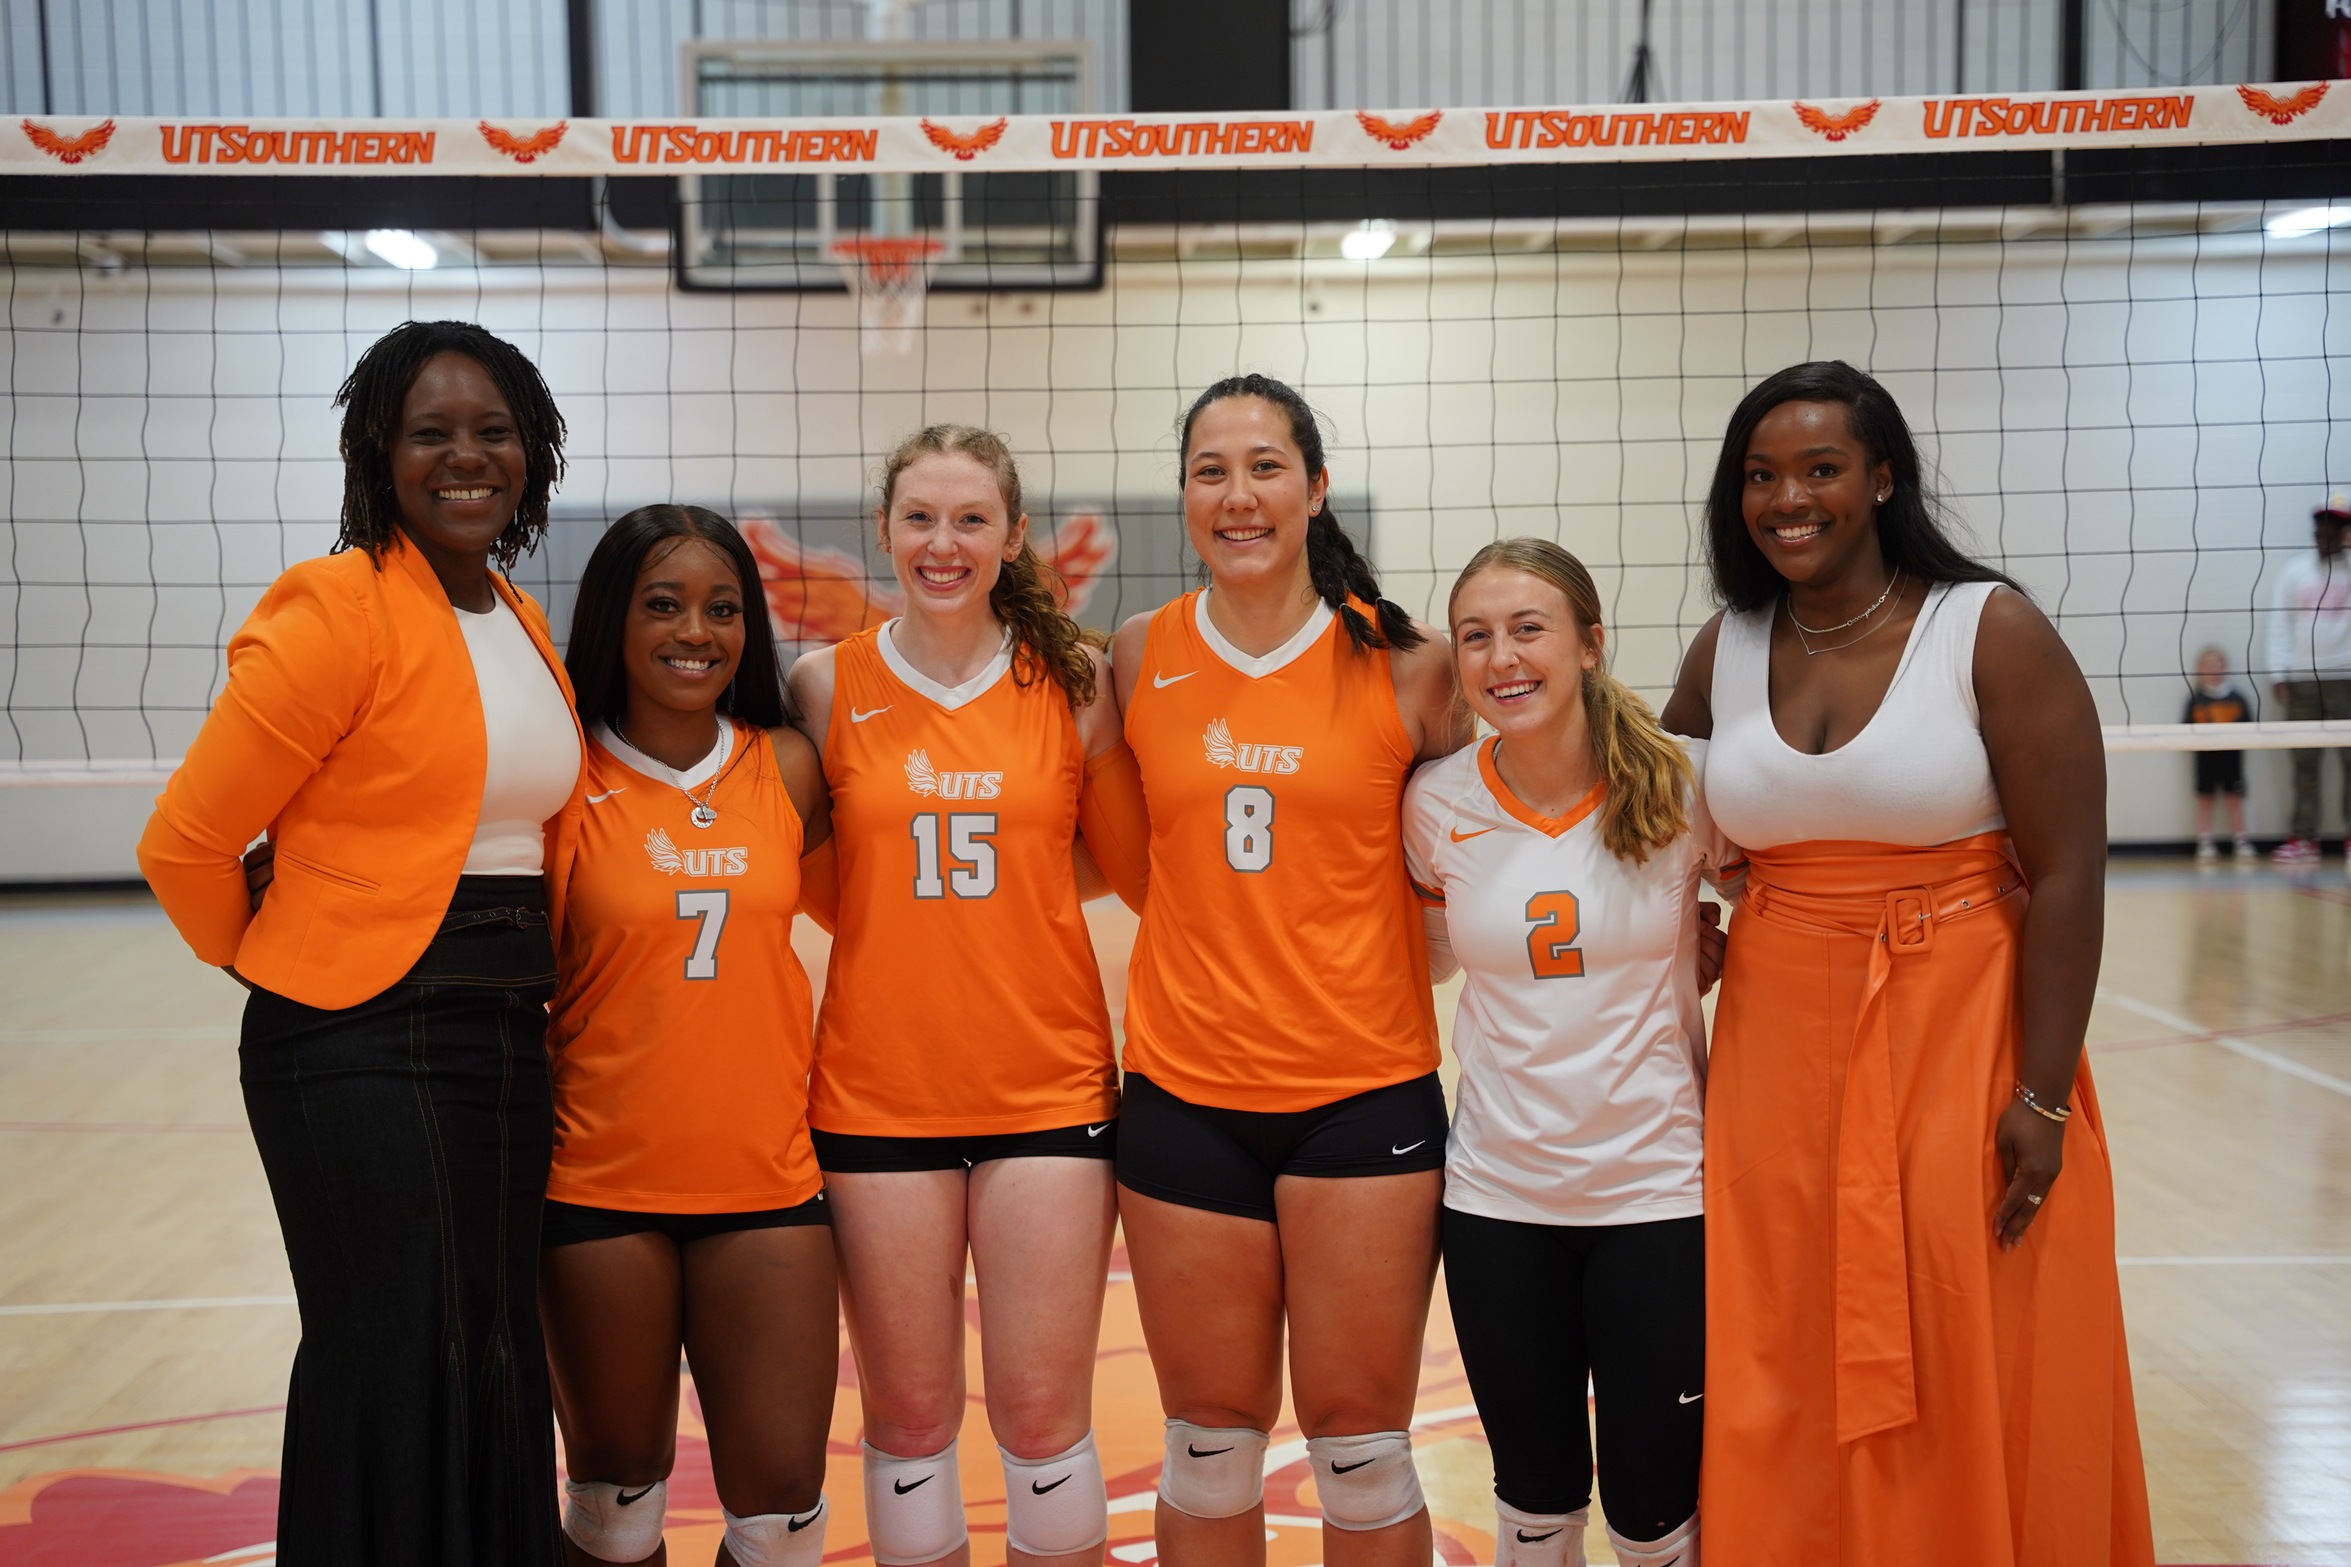 Four Firehawks Honored on Senior Day, UT Southern Falls to Loyola